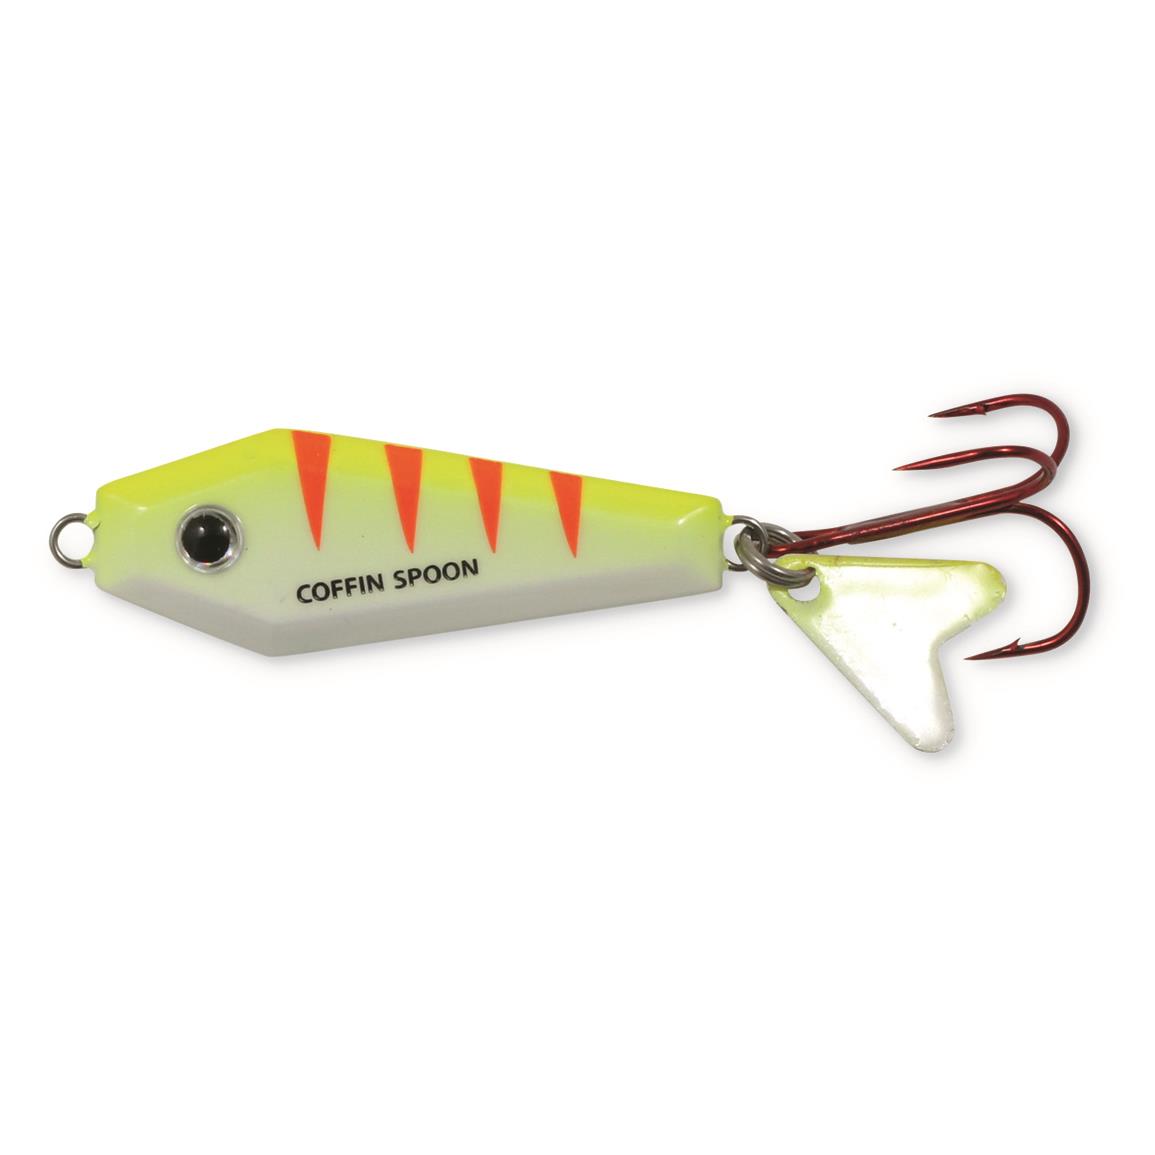 VMC Tingler Spoon - 735088, Ice Tackle at Sportsman's Guide